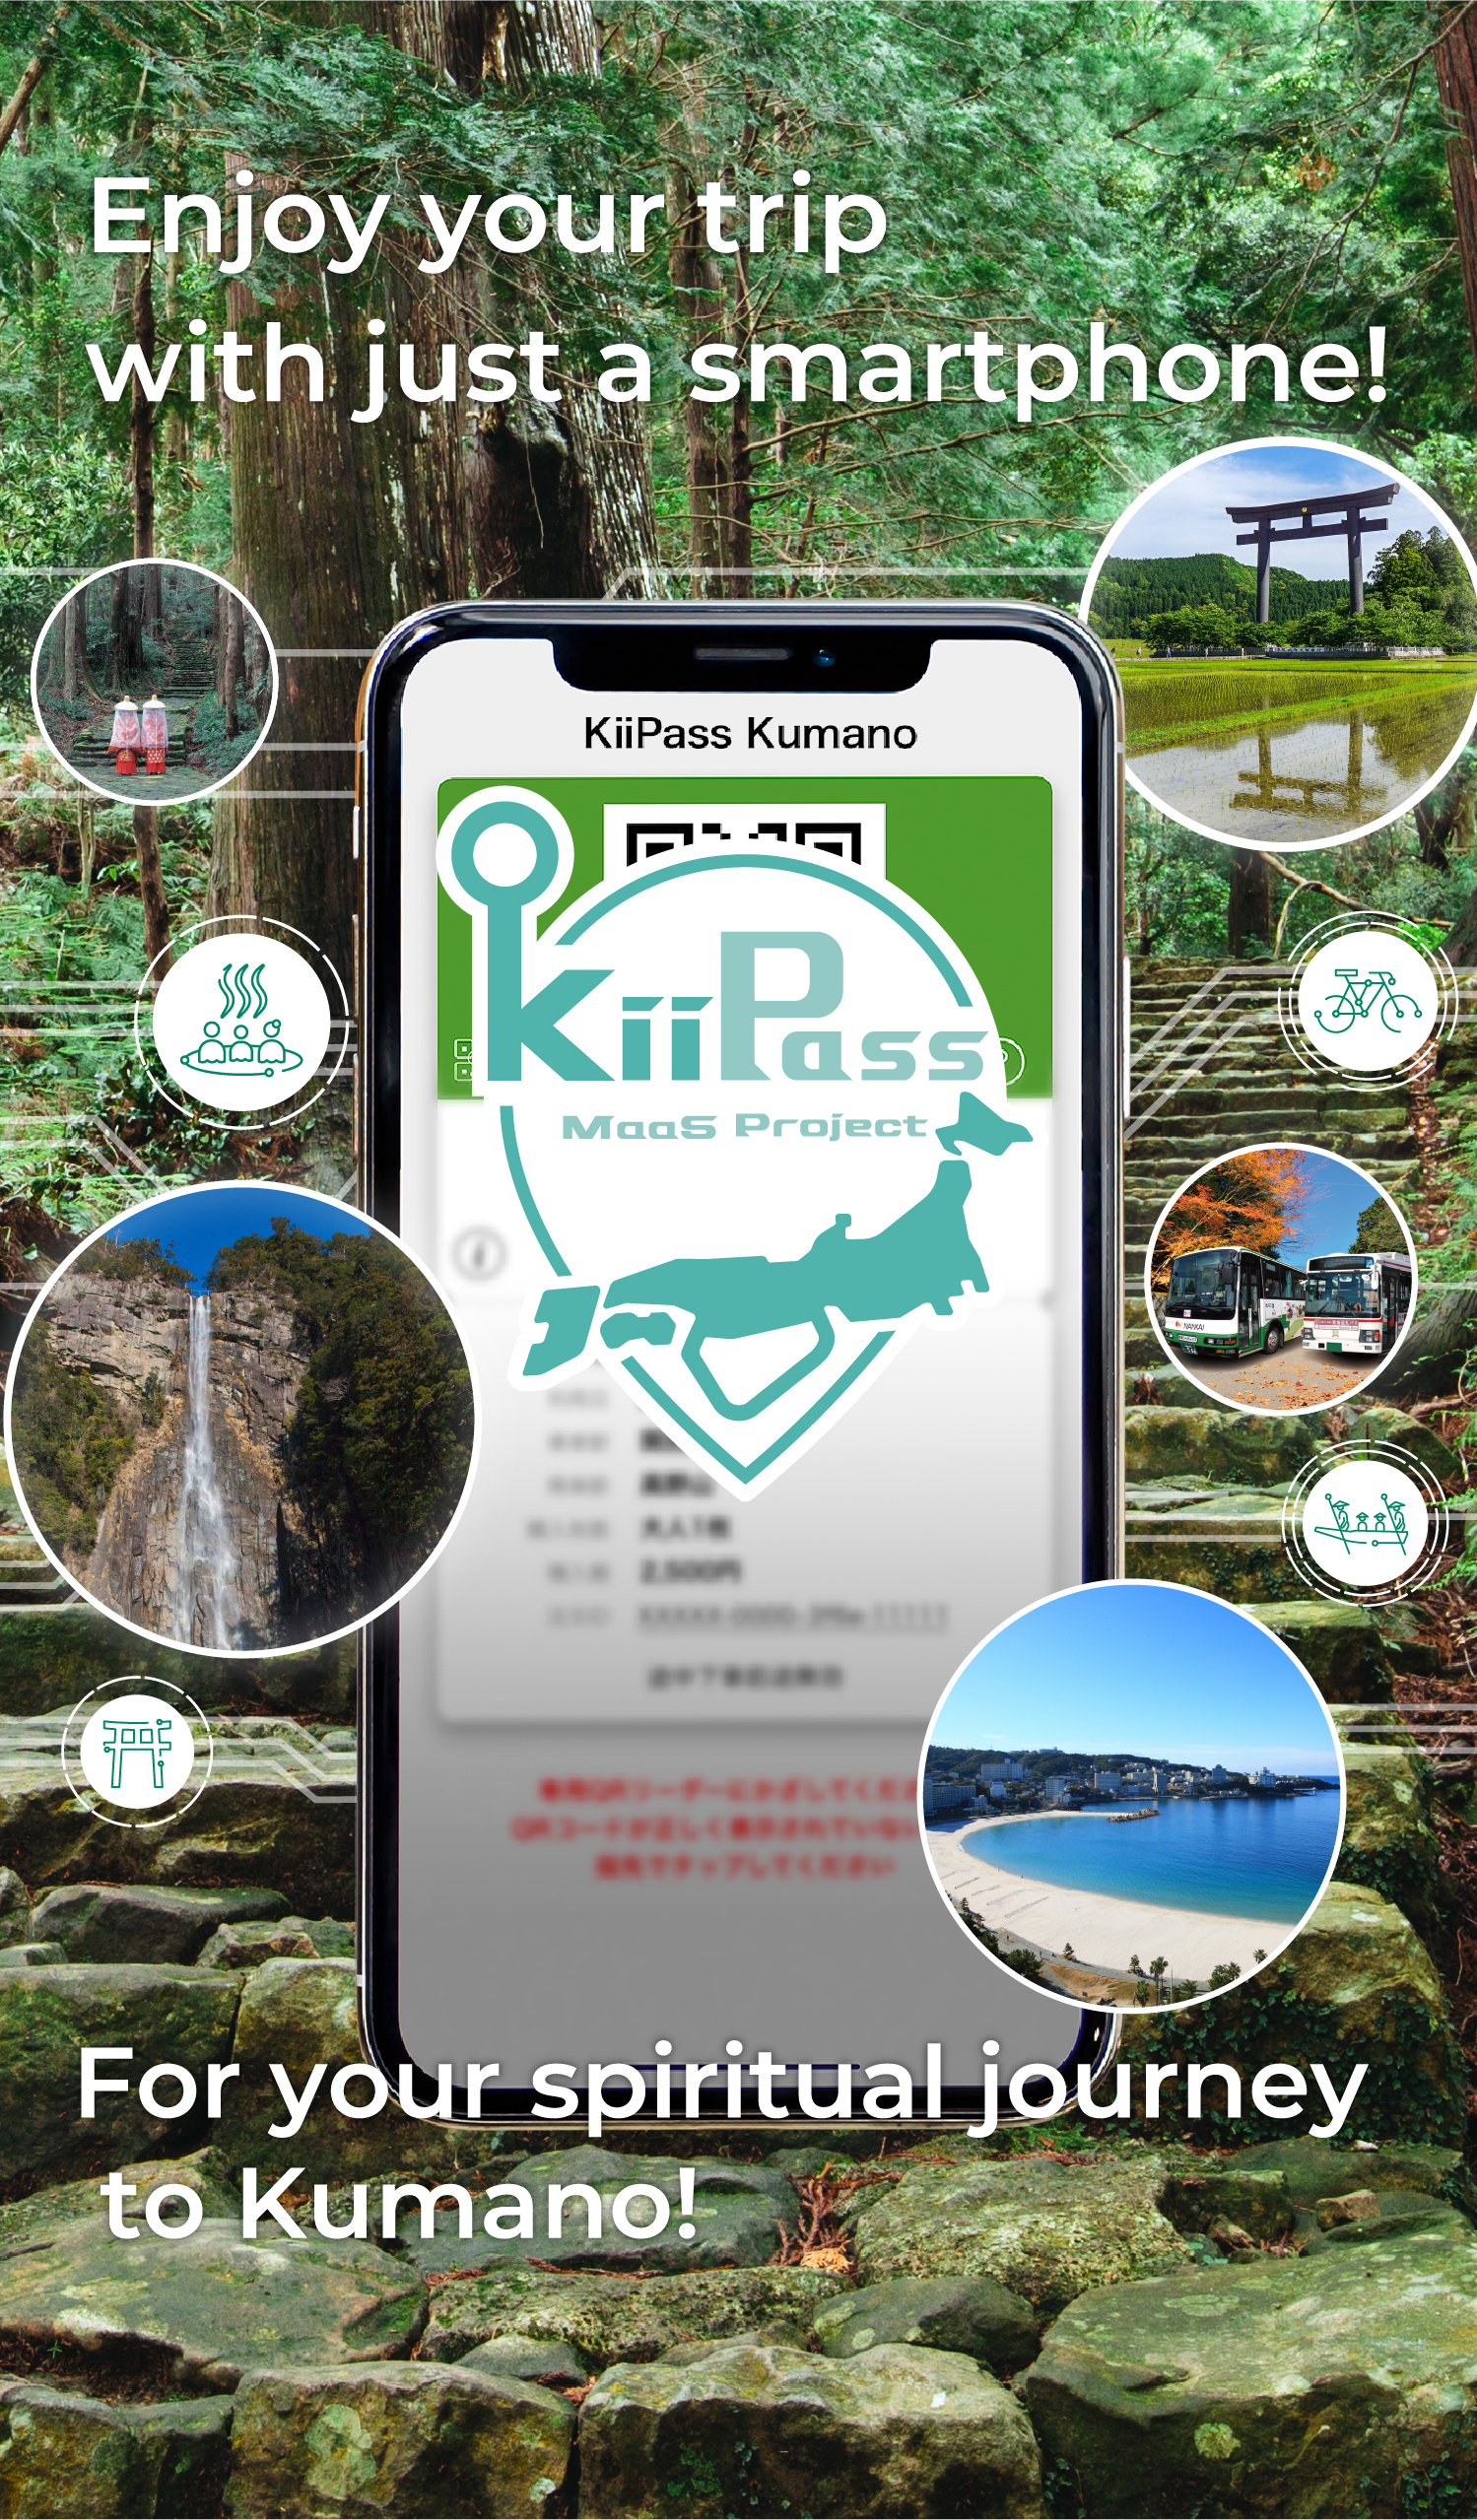 Enjoy your trip with just a smartphone!For your spiritual journey to Kumano!